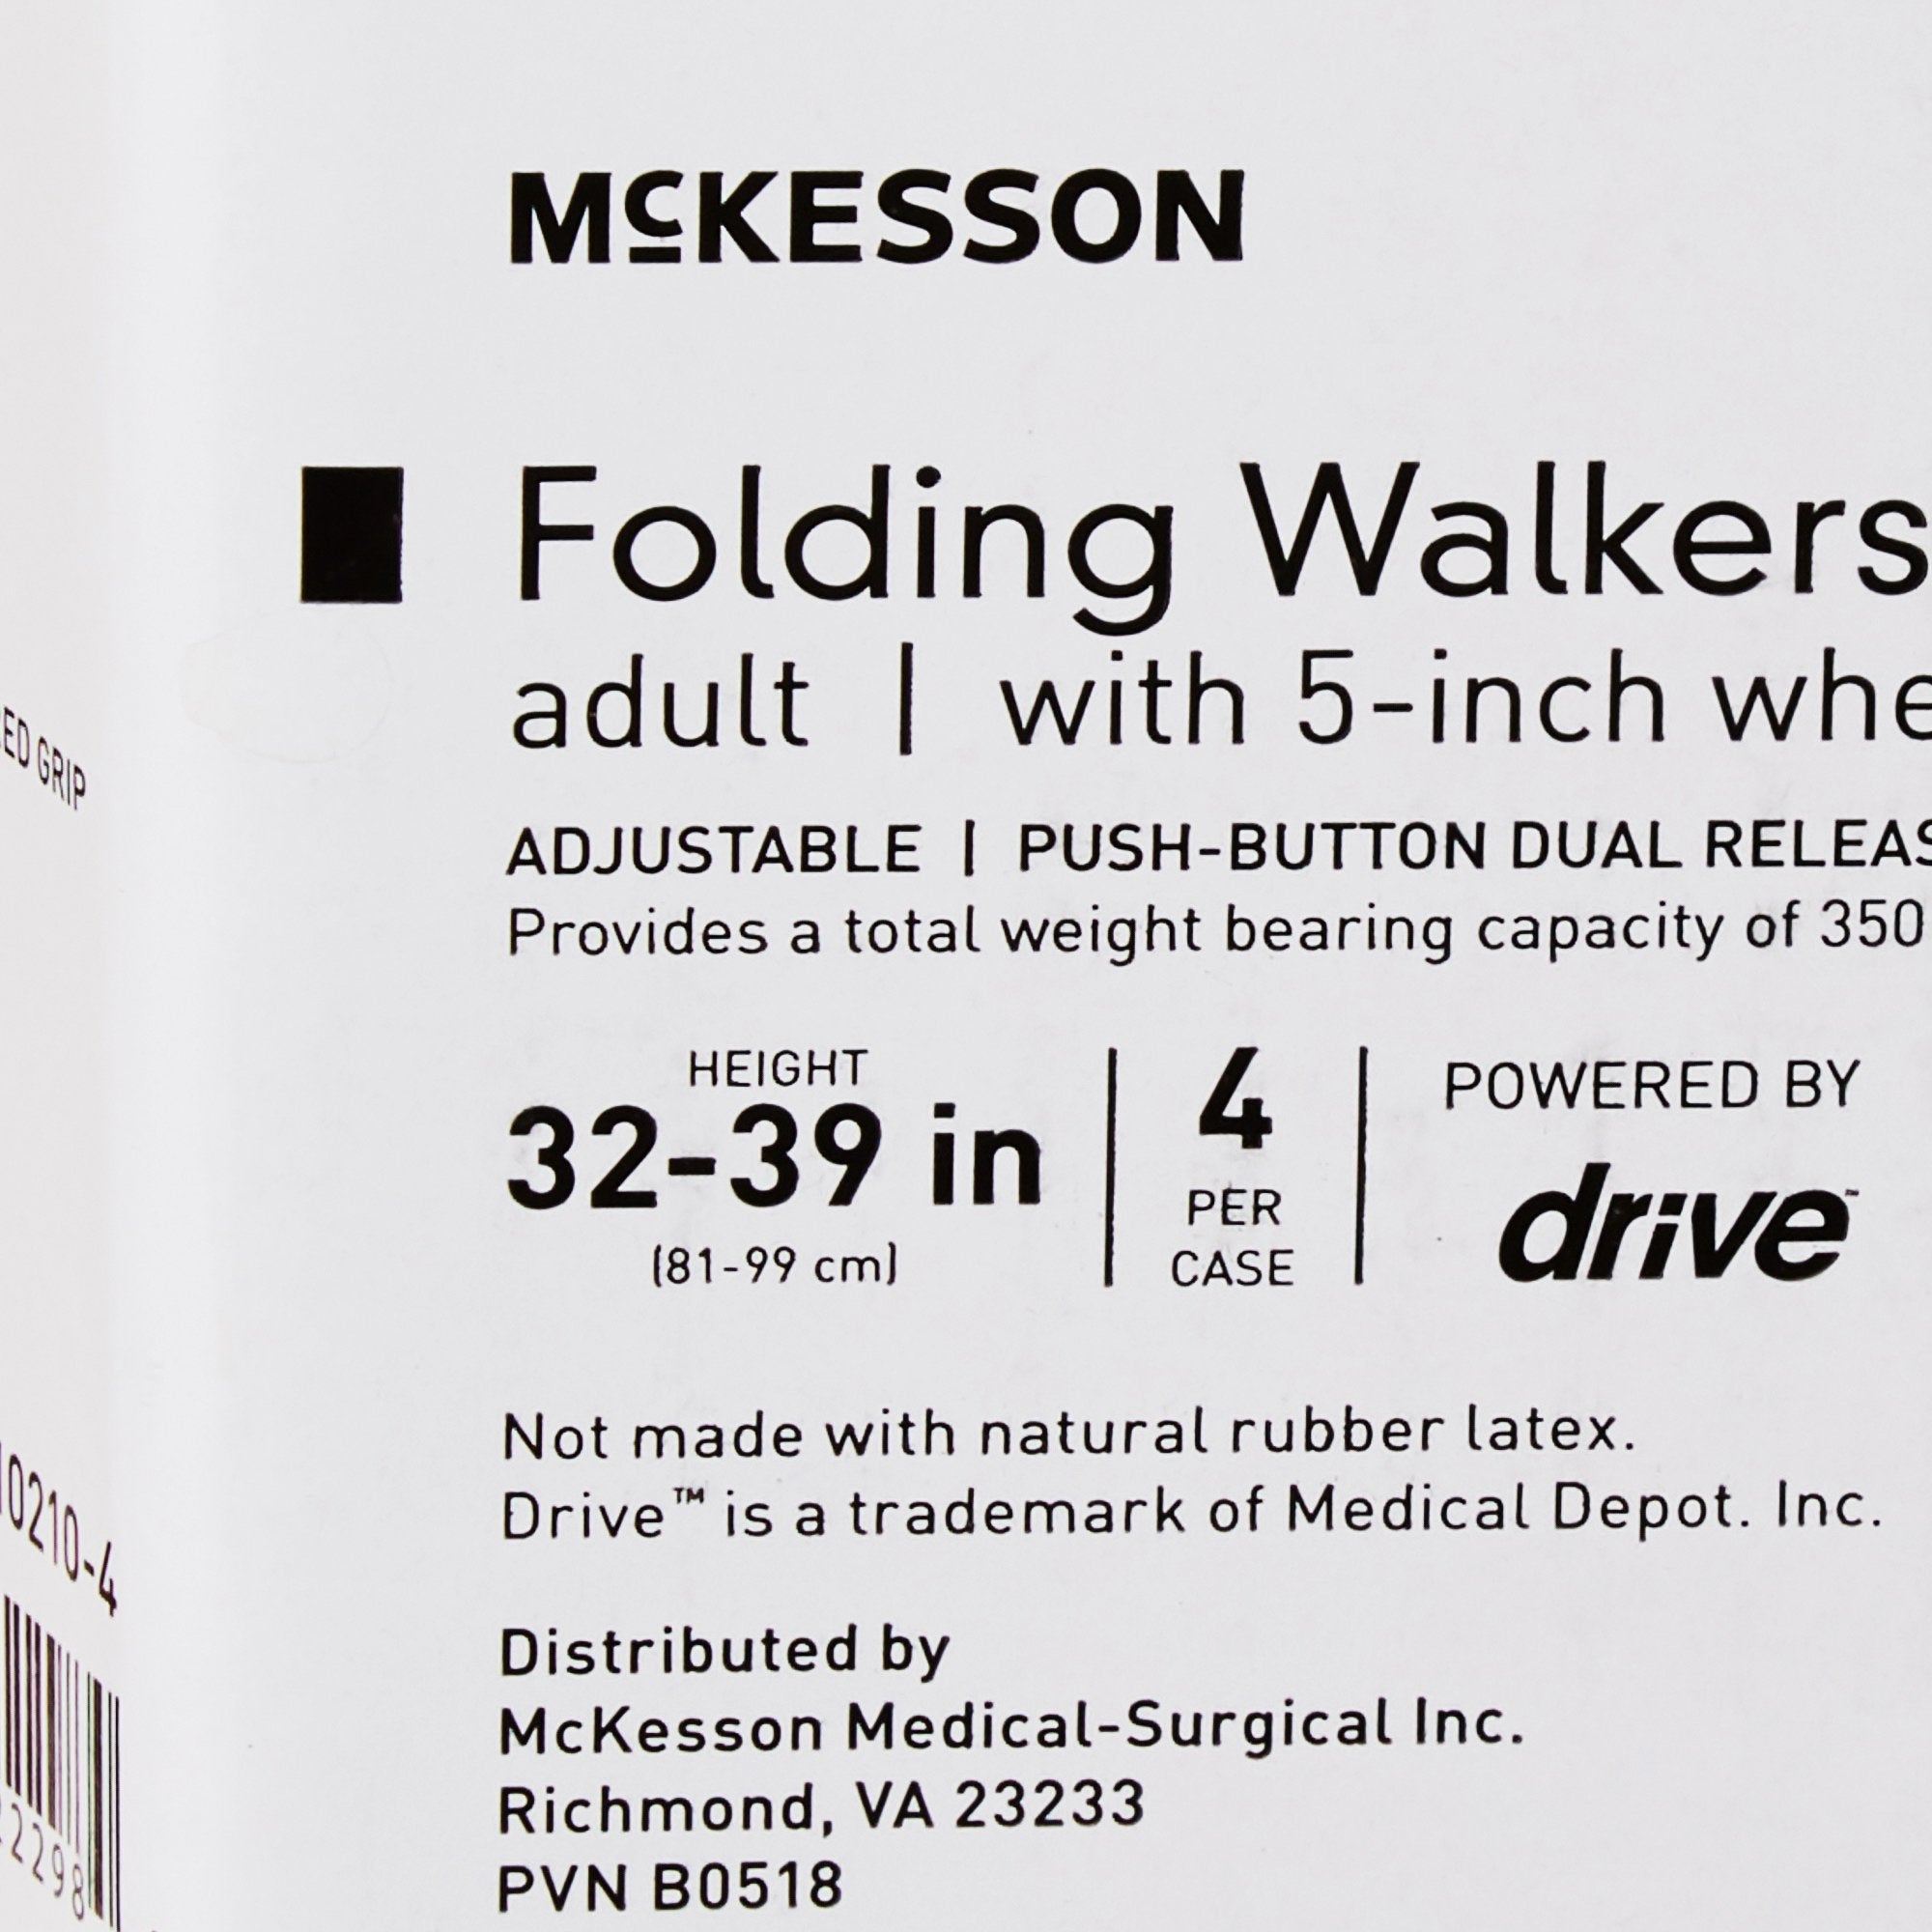 Mobility Aids>Walkers - McKesson - Wasatch Medical Supply